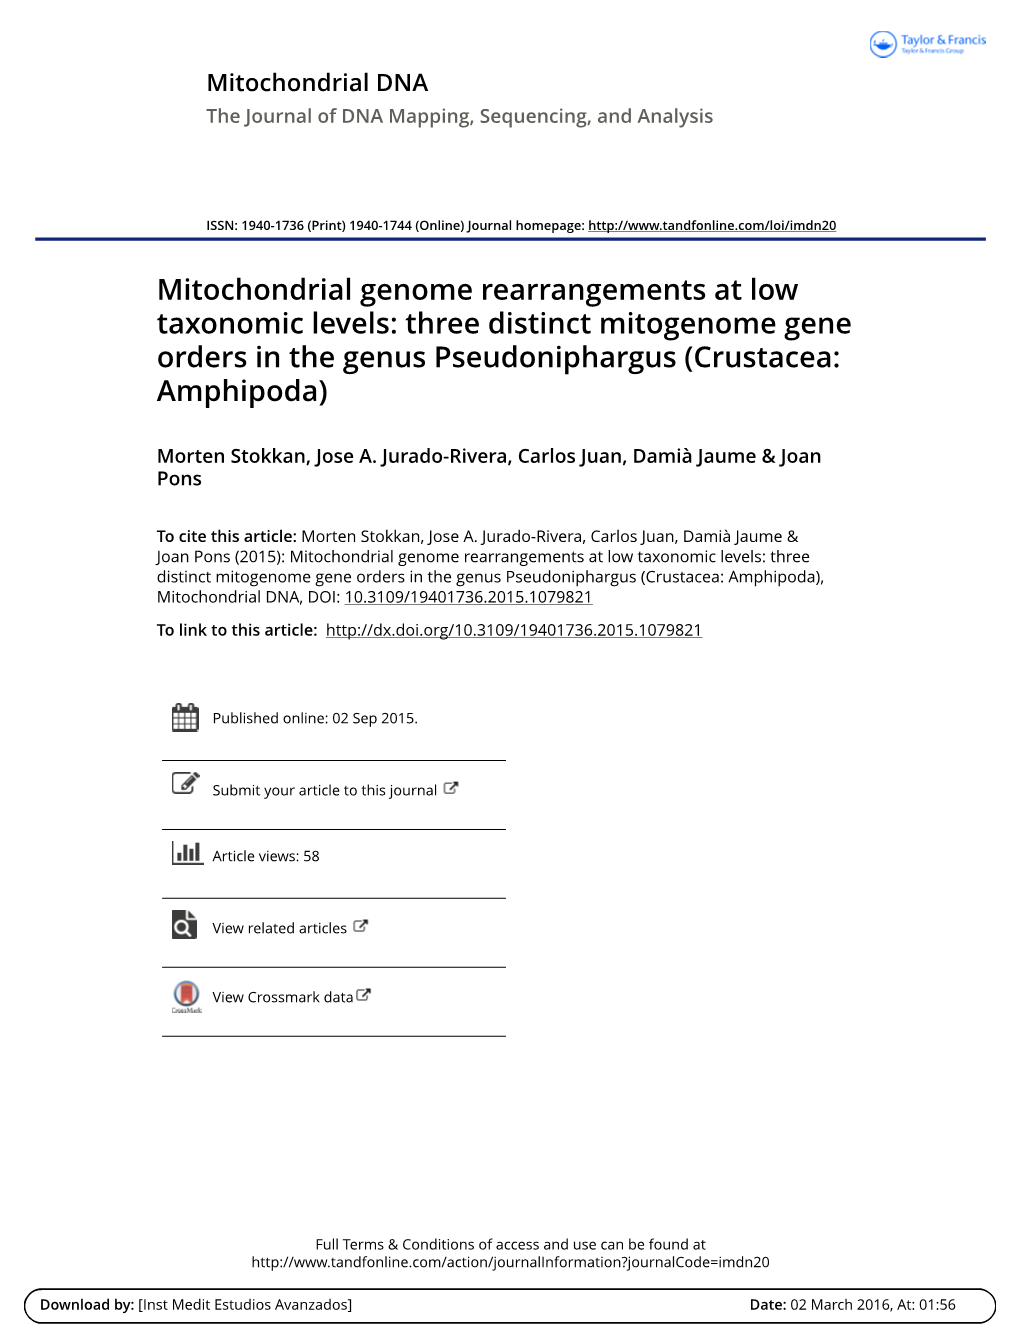 Mitochondrial Genome Rearrangements at Low Taxonomic Levels: Three Distinct Mitogenome Gene Orders in the Genus Pseudoniphargus (Crustacea: Amphipoda)